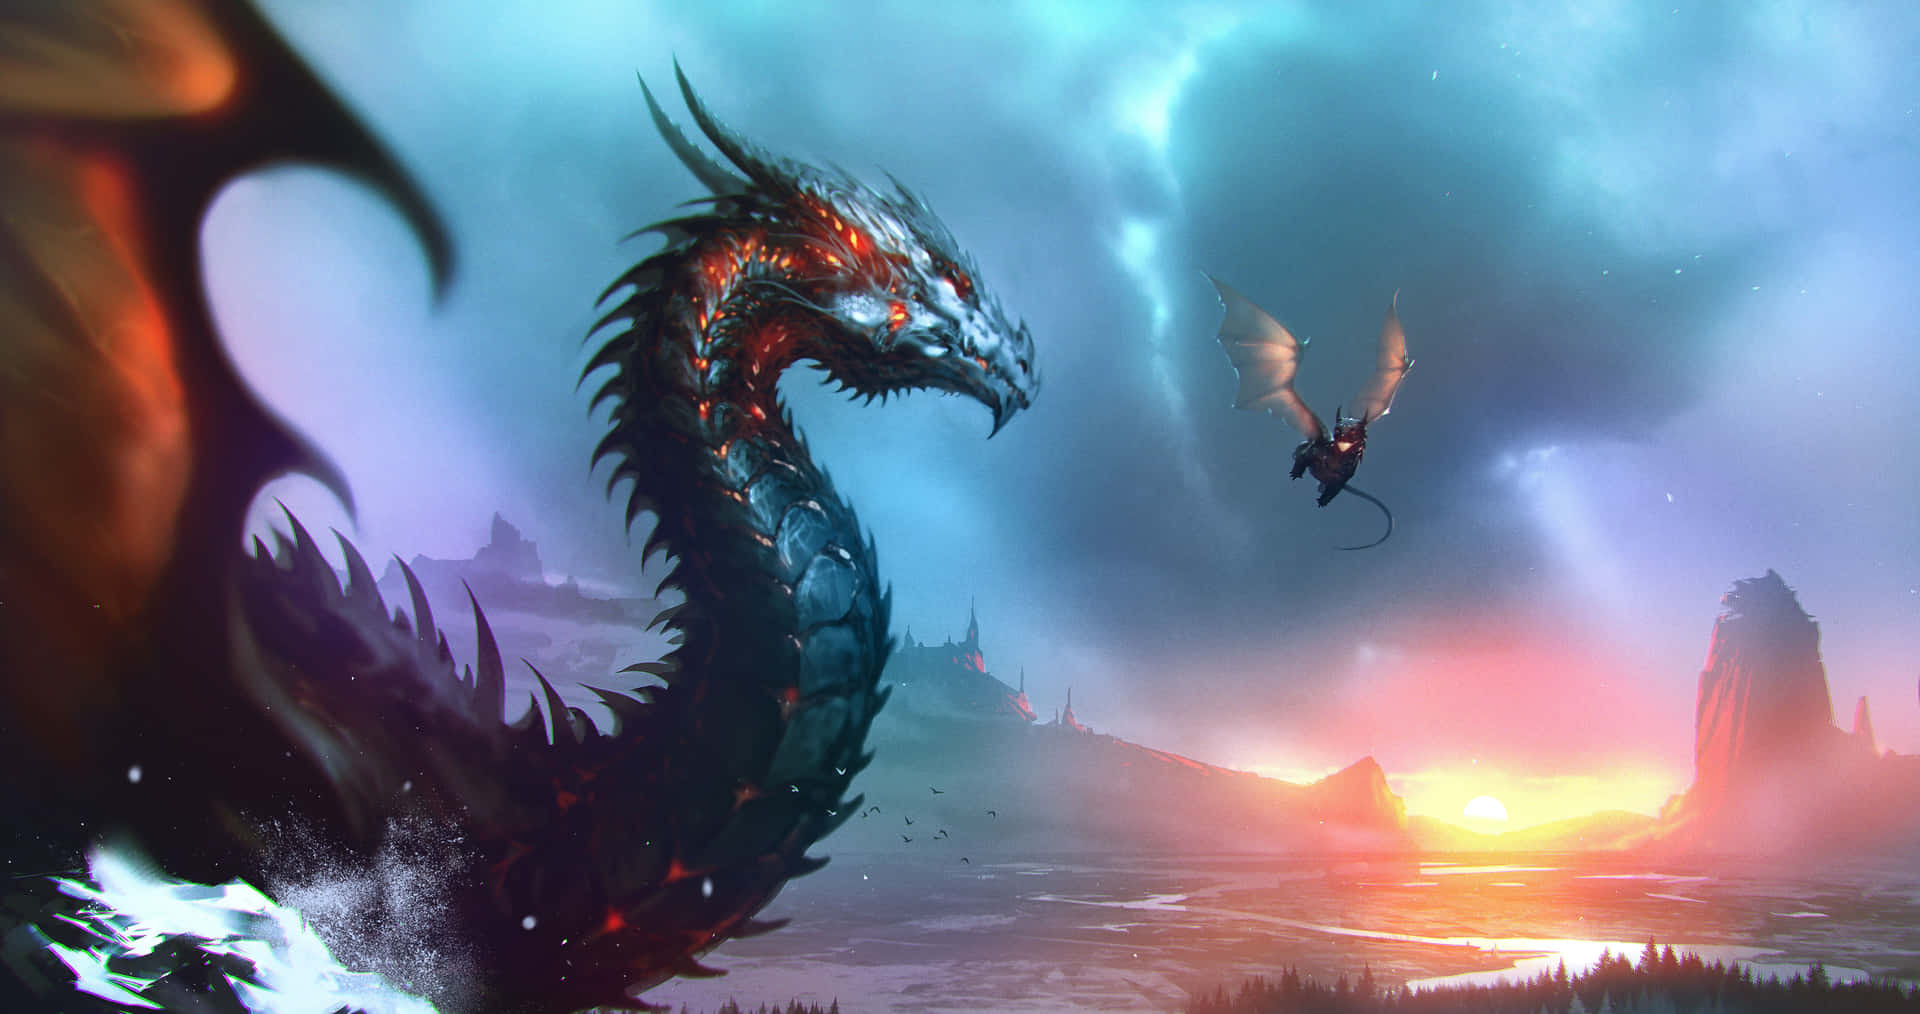 "A mysterious mythical dragon flies across the horizon, mysterious and fascinating." Wallpaper